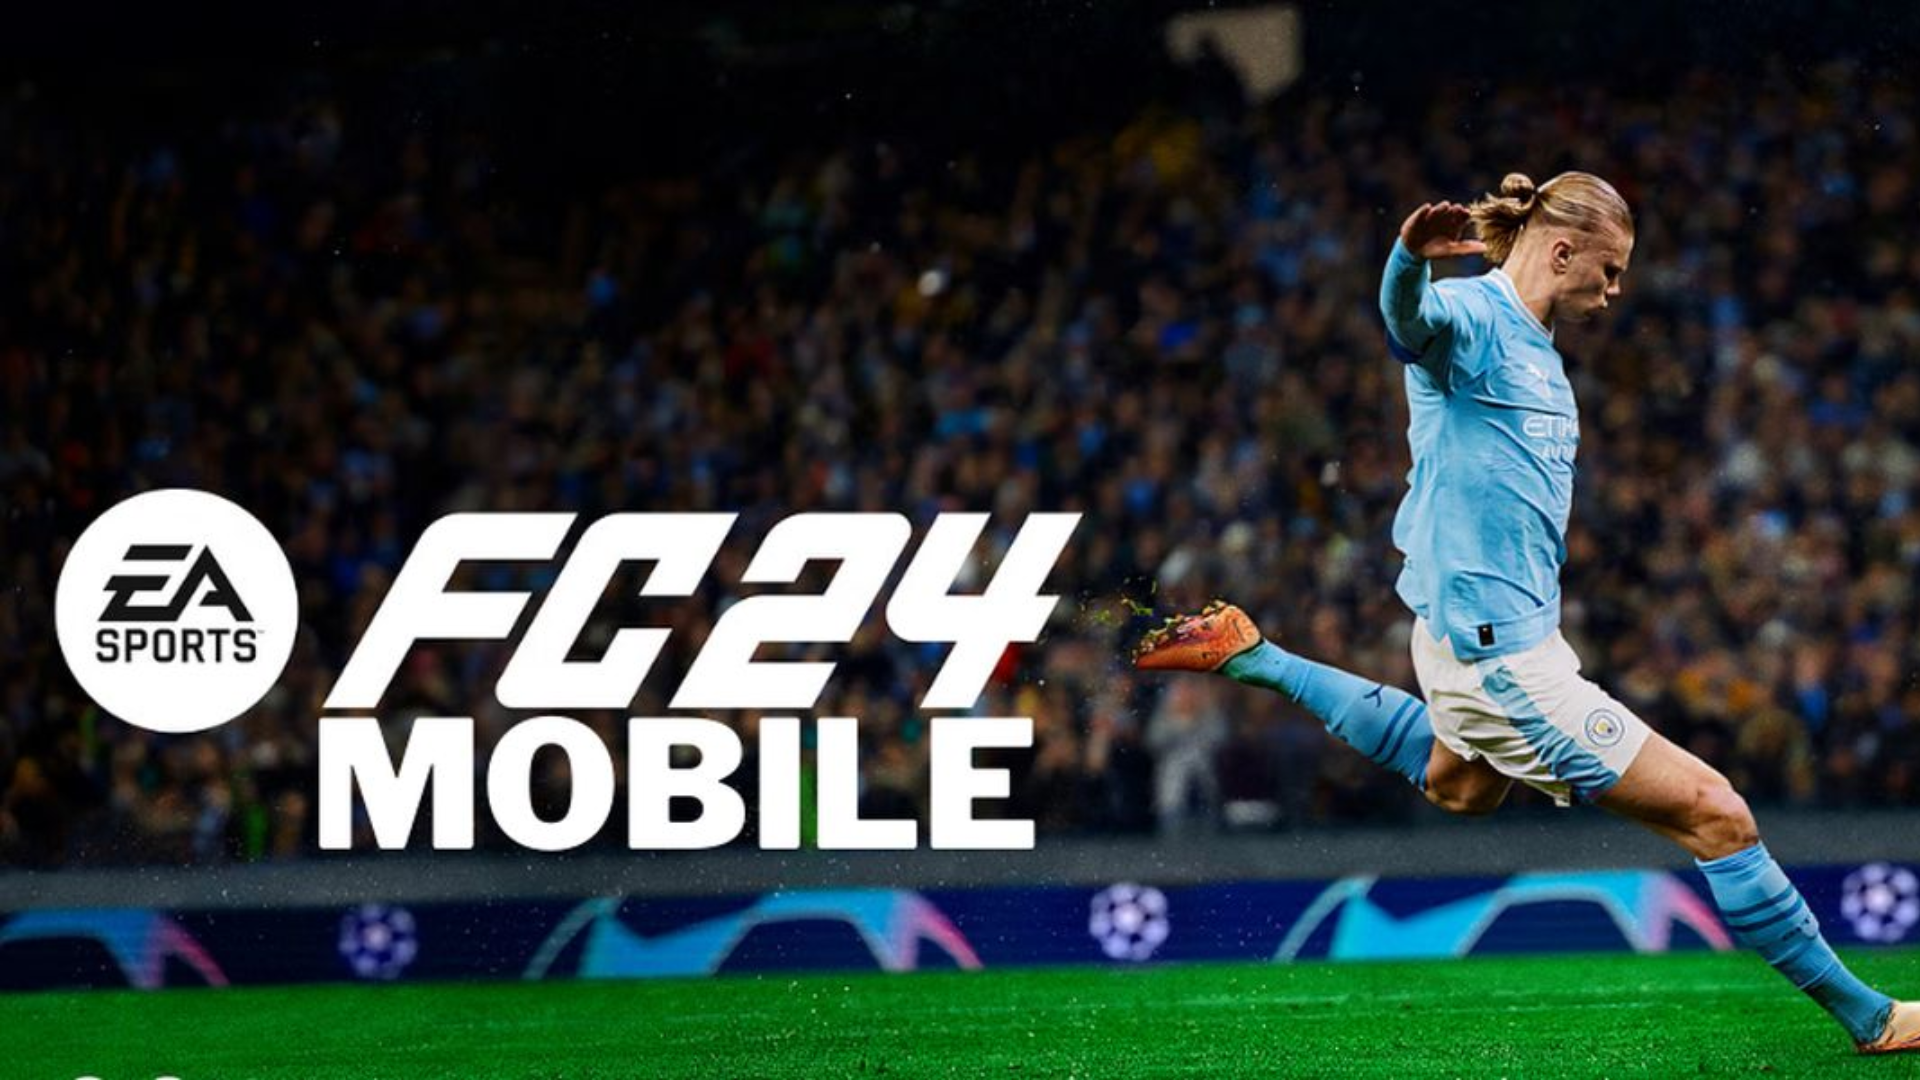 EA SPORTS FC™ Mobile Soccer Game for Android - Download